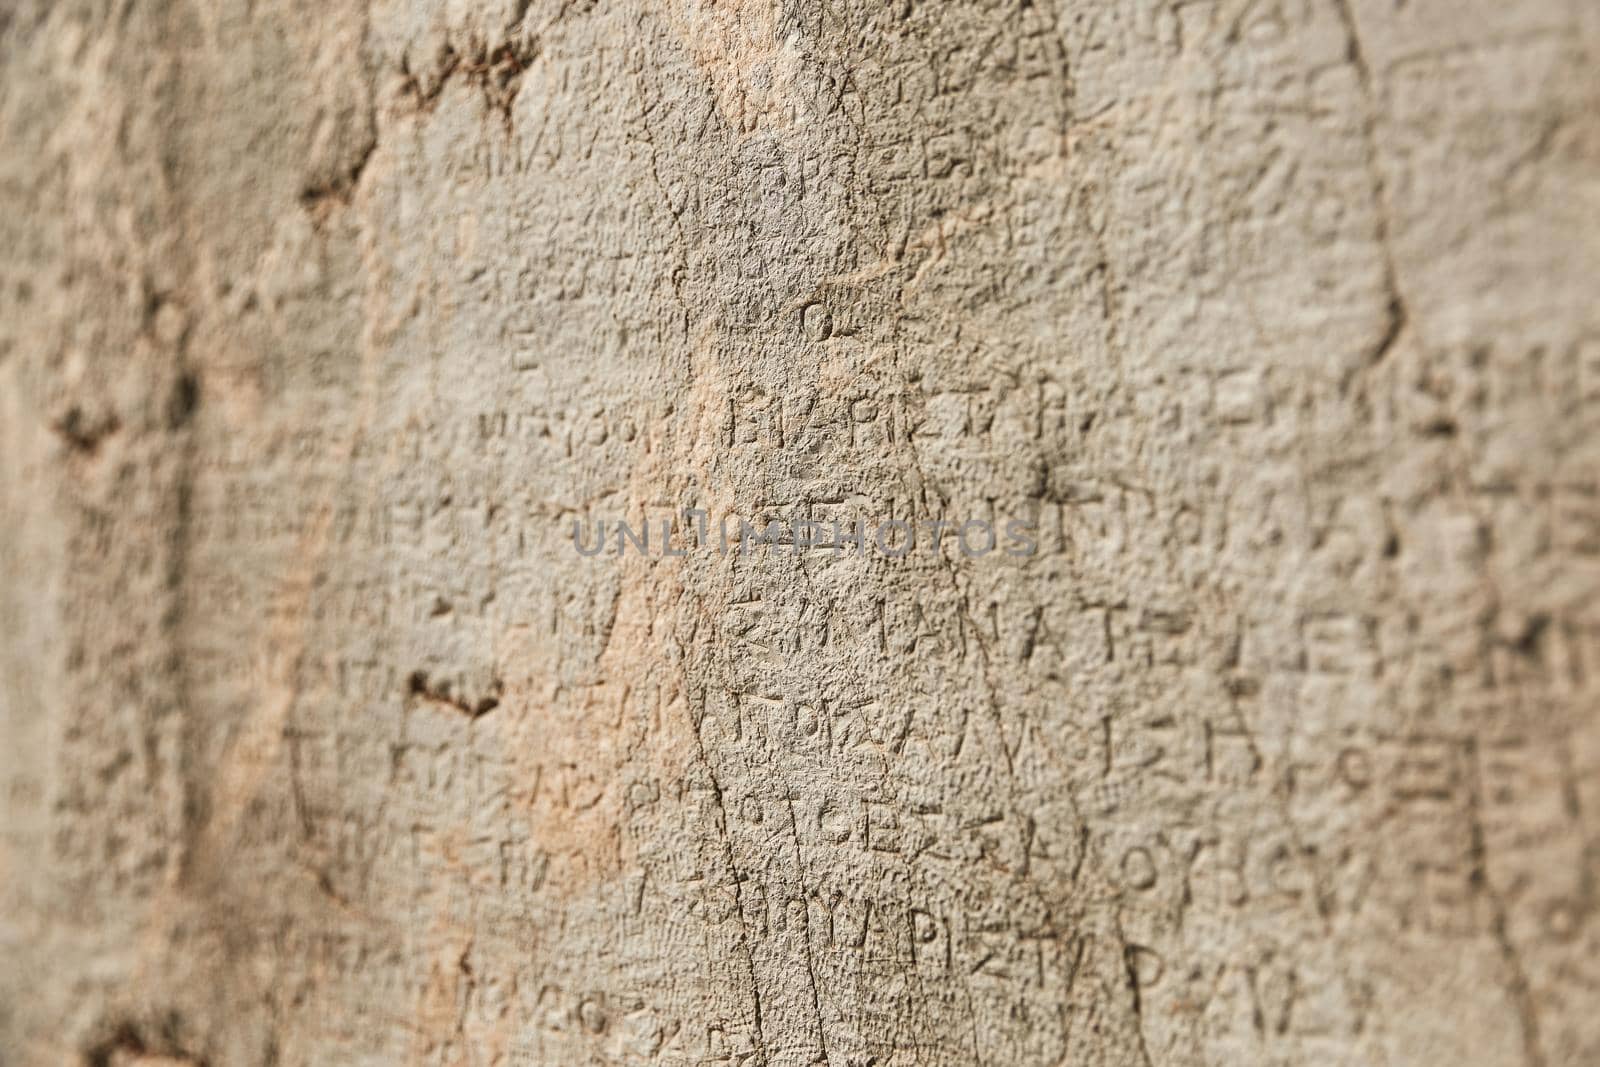 Old Writing at The Historical Site of Delphi, Greece